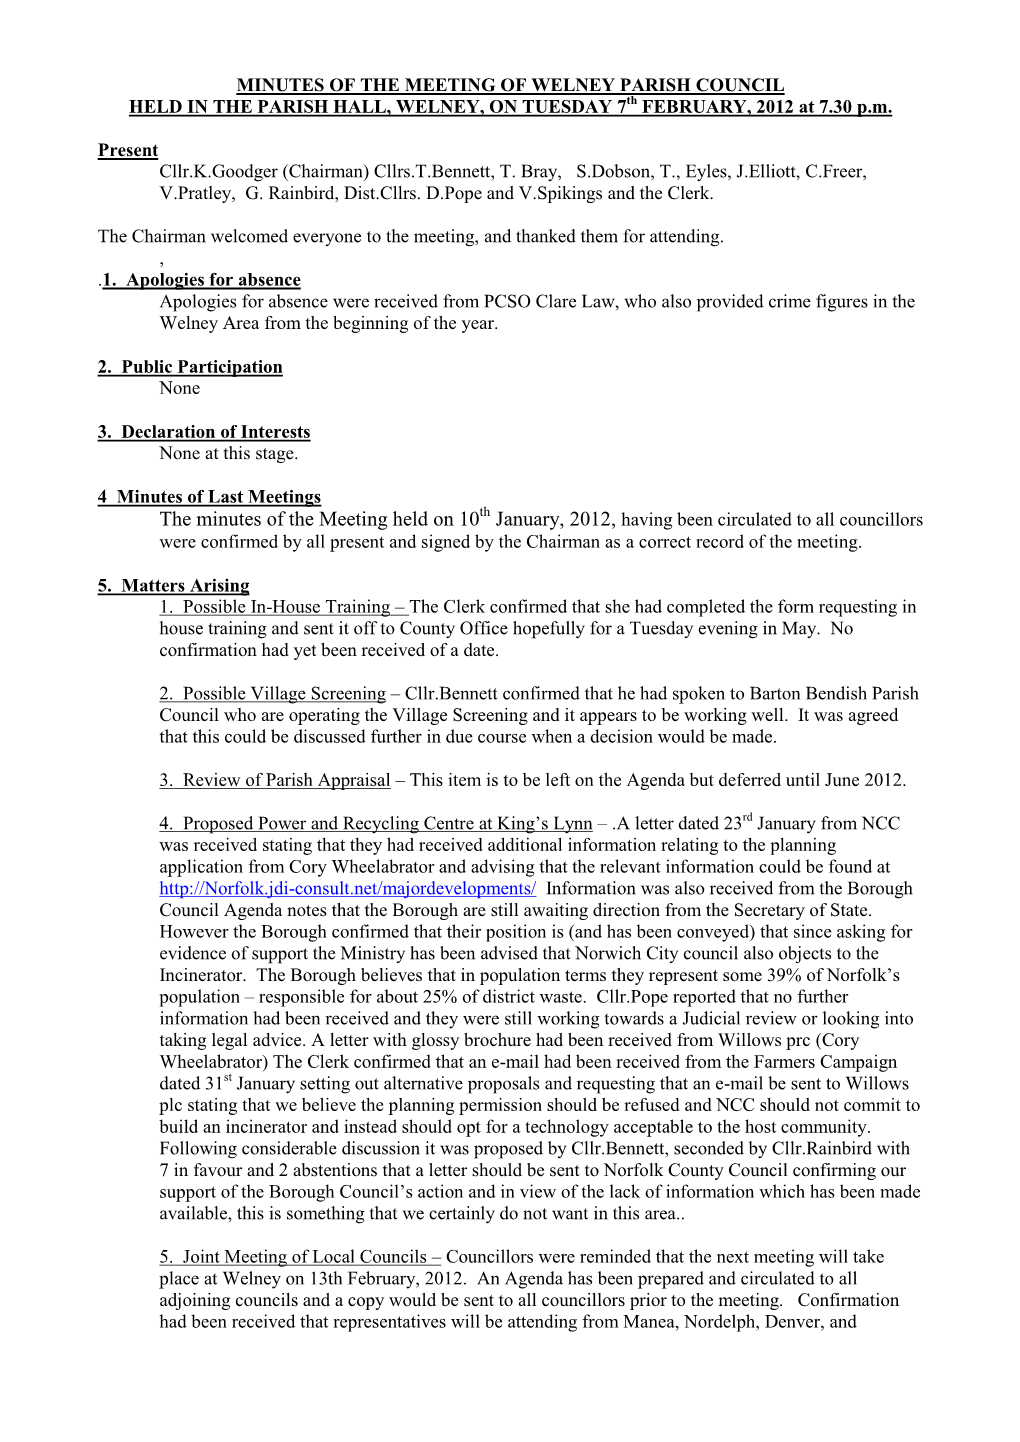 Minutes of the Meeting of the Welney Parish Council